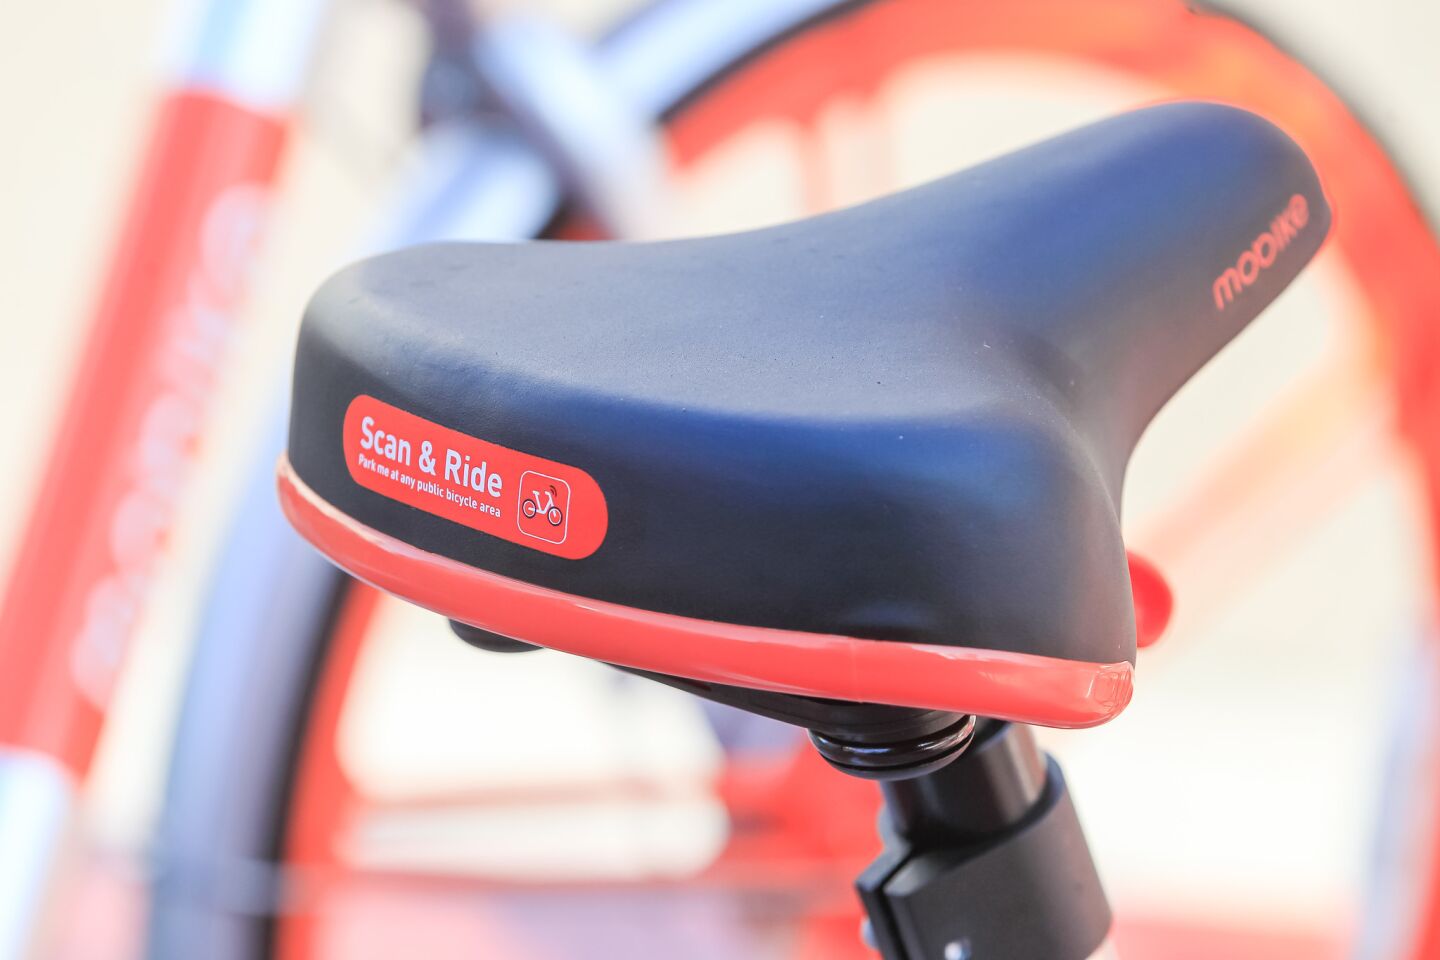 This is Mobike with a sign on the seat.